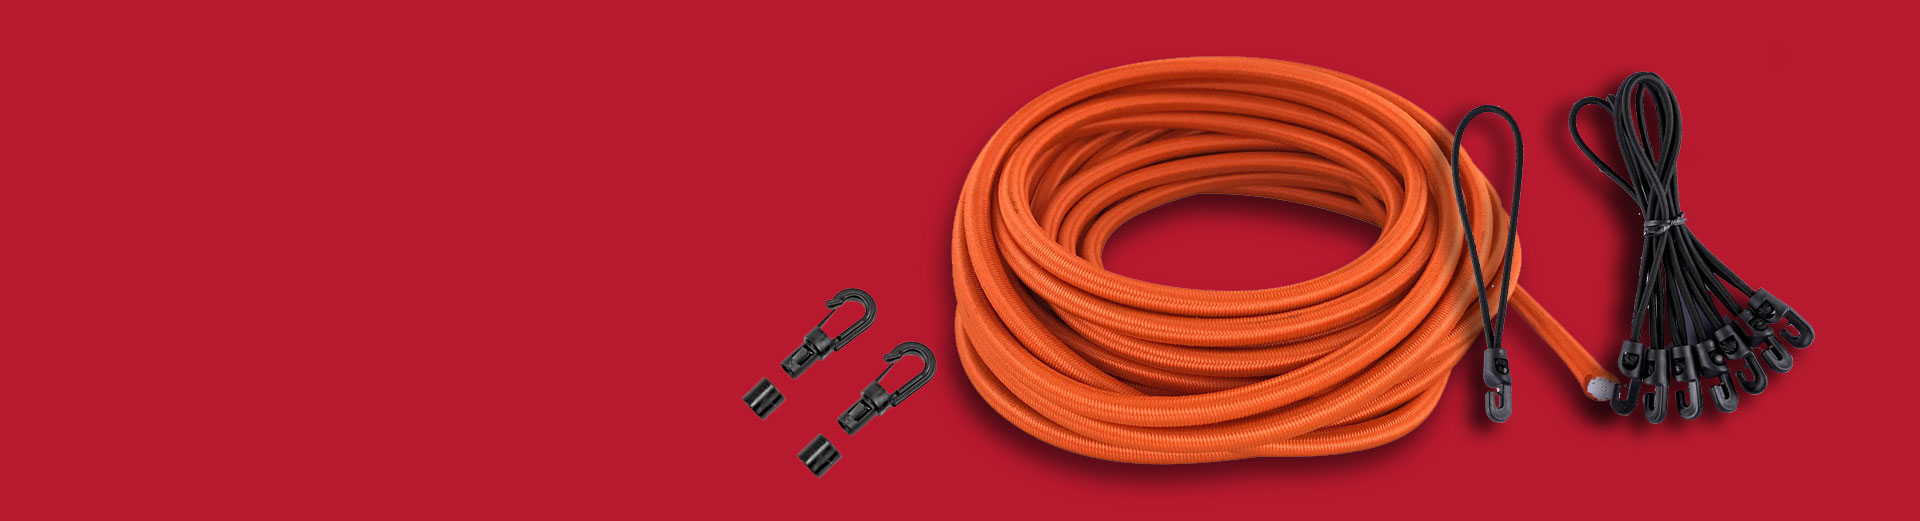 elastic cord suppliers